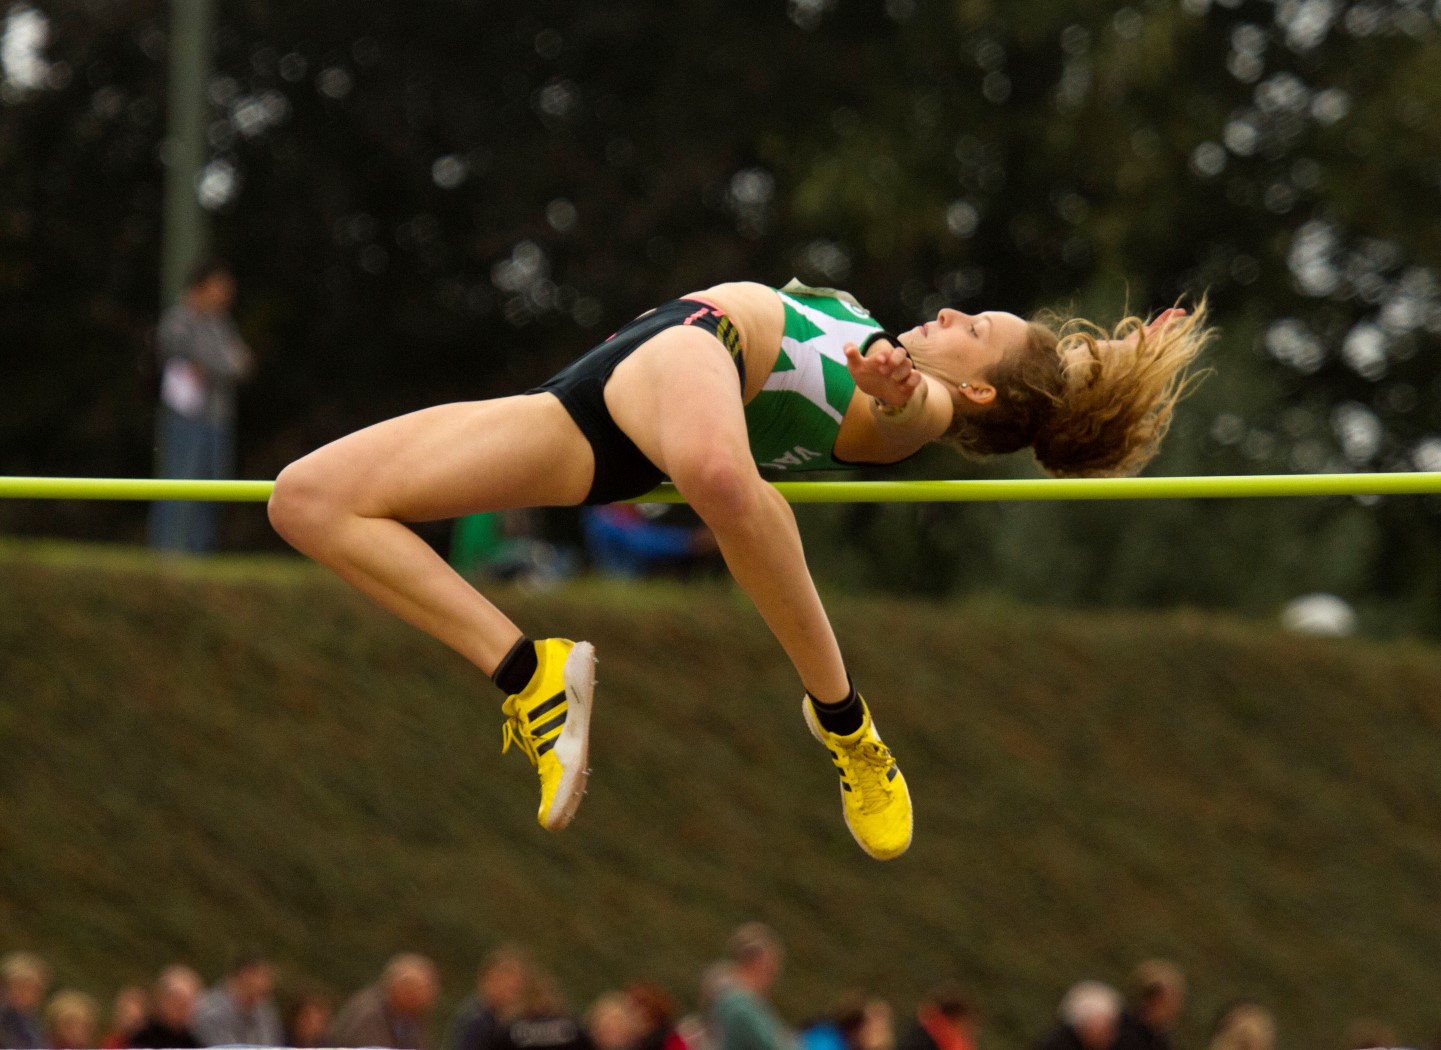 R tutorial with pole vault and high jump results: Clearing a new bar